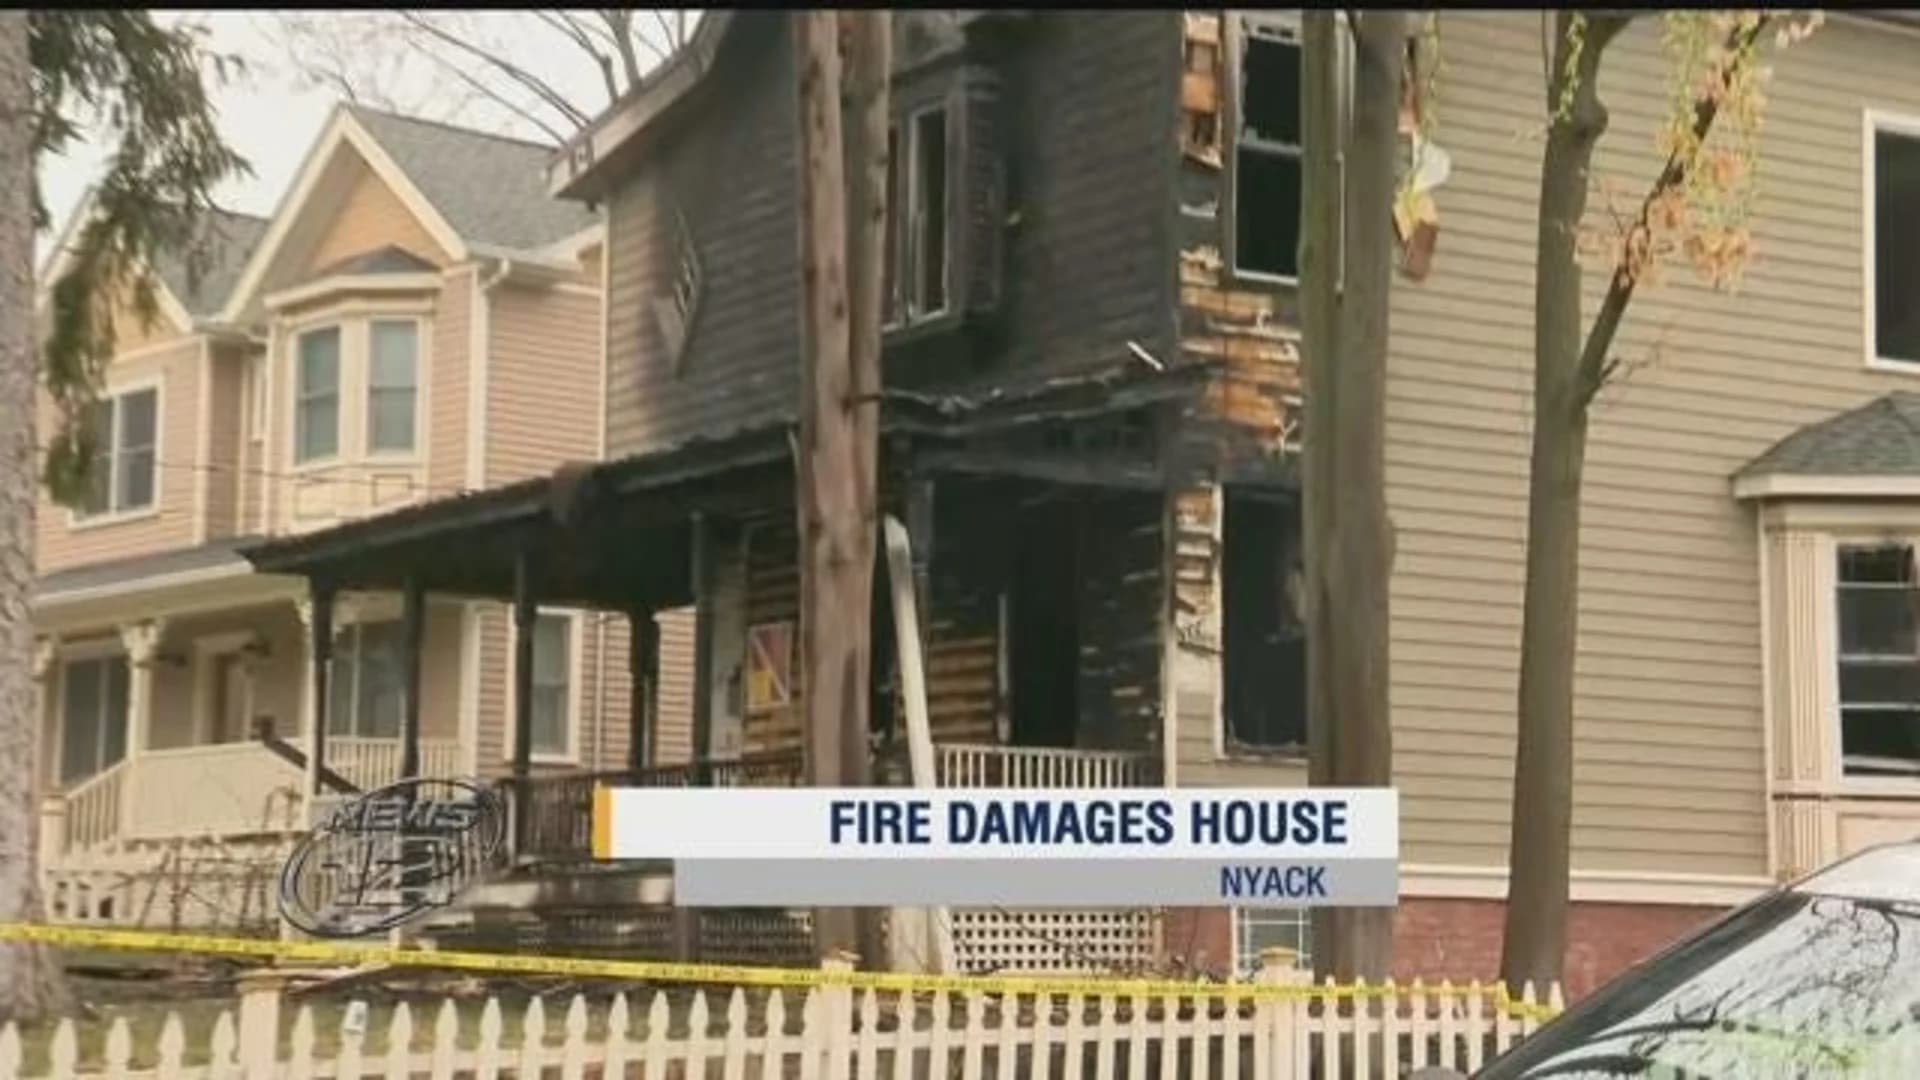 Family left homeless after Nyack fire